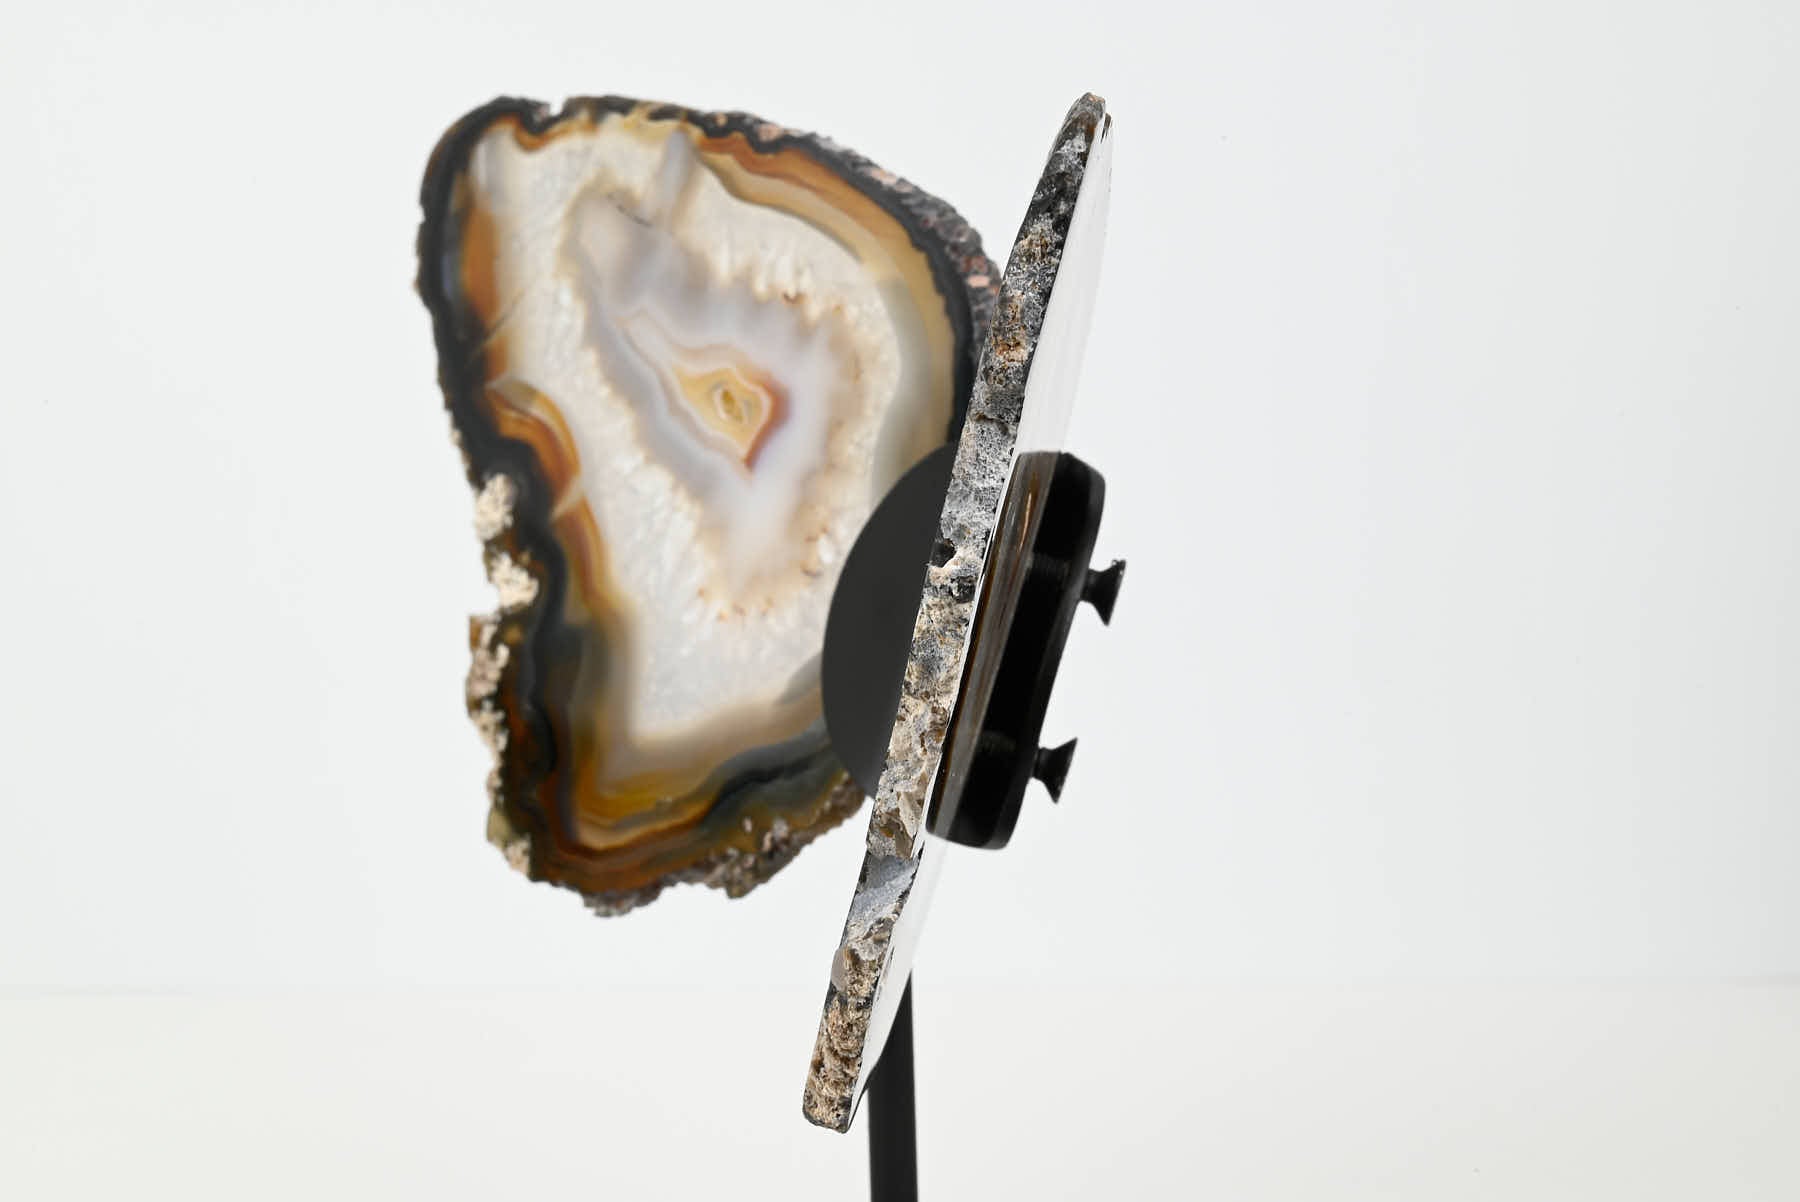 Natural Agate Butterfly on Stand - 0.57kg and 18cm Tall - #BUNATU-10018